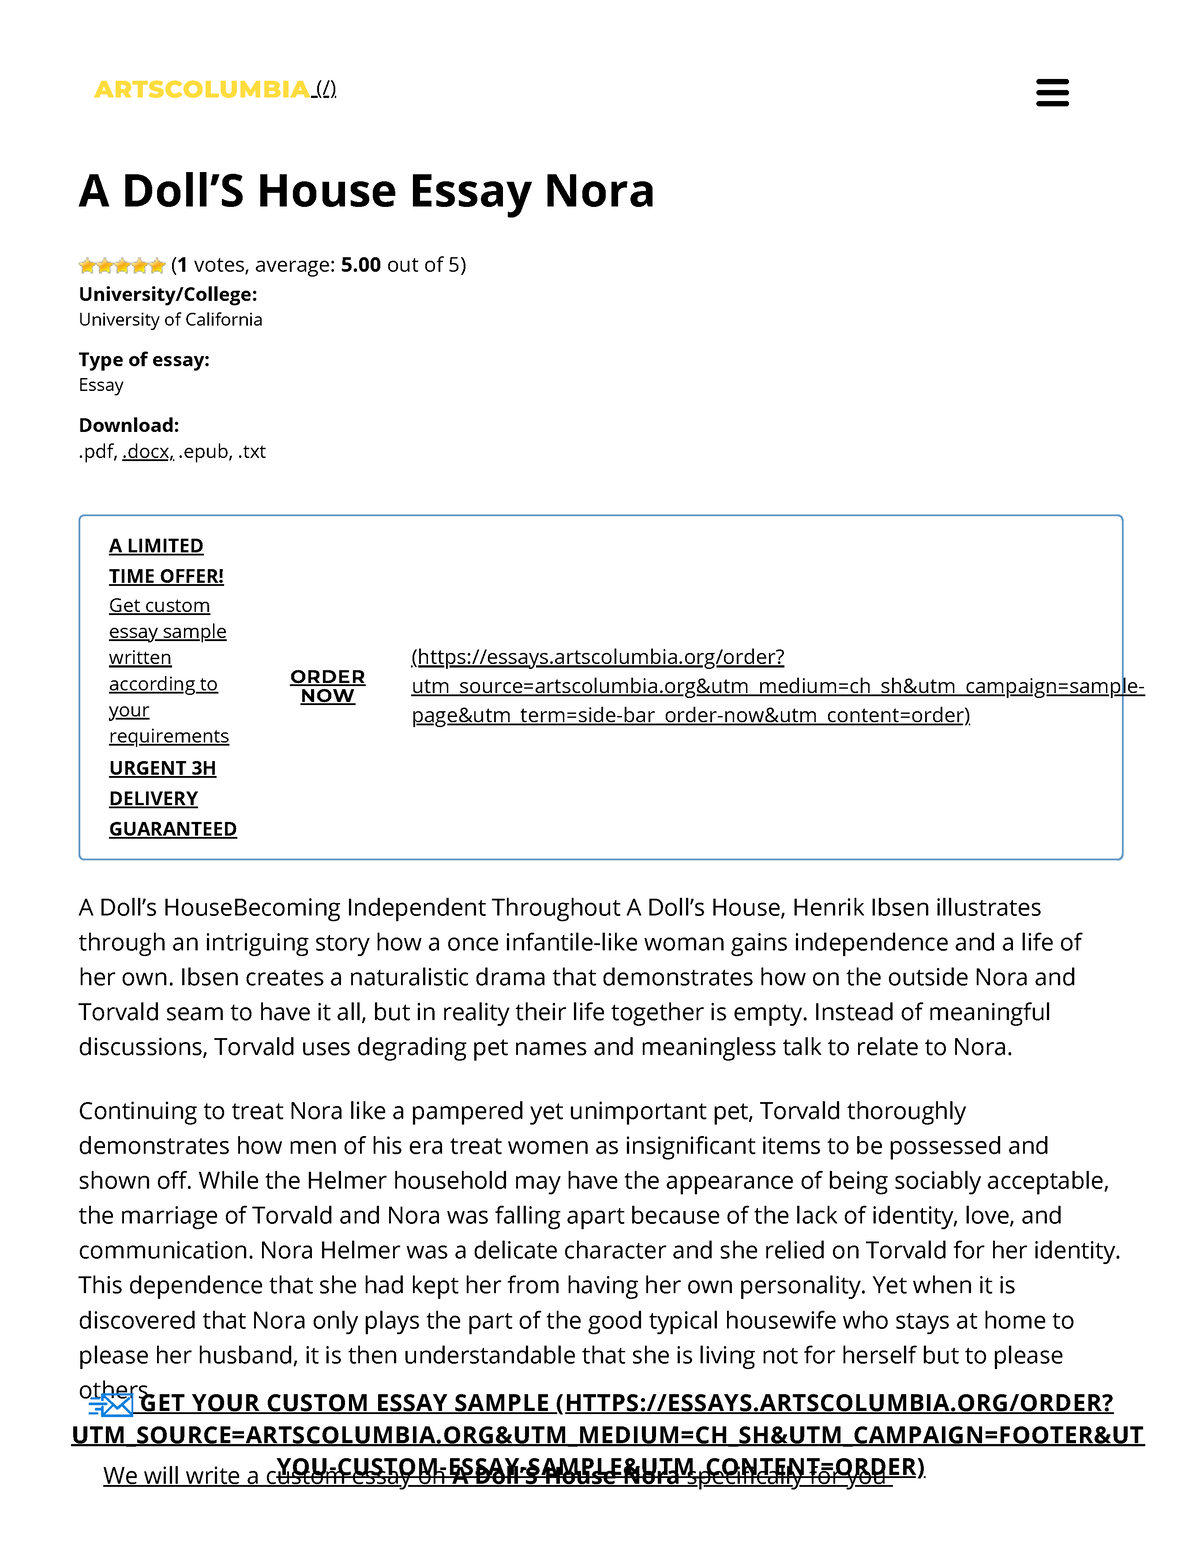 a doll's house review essay